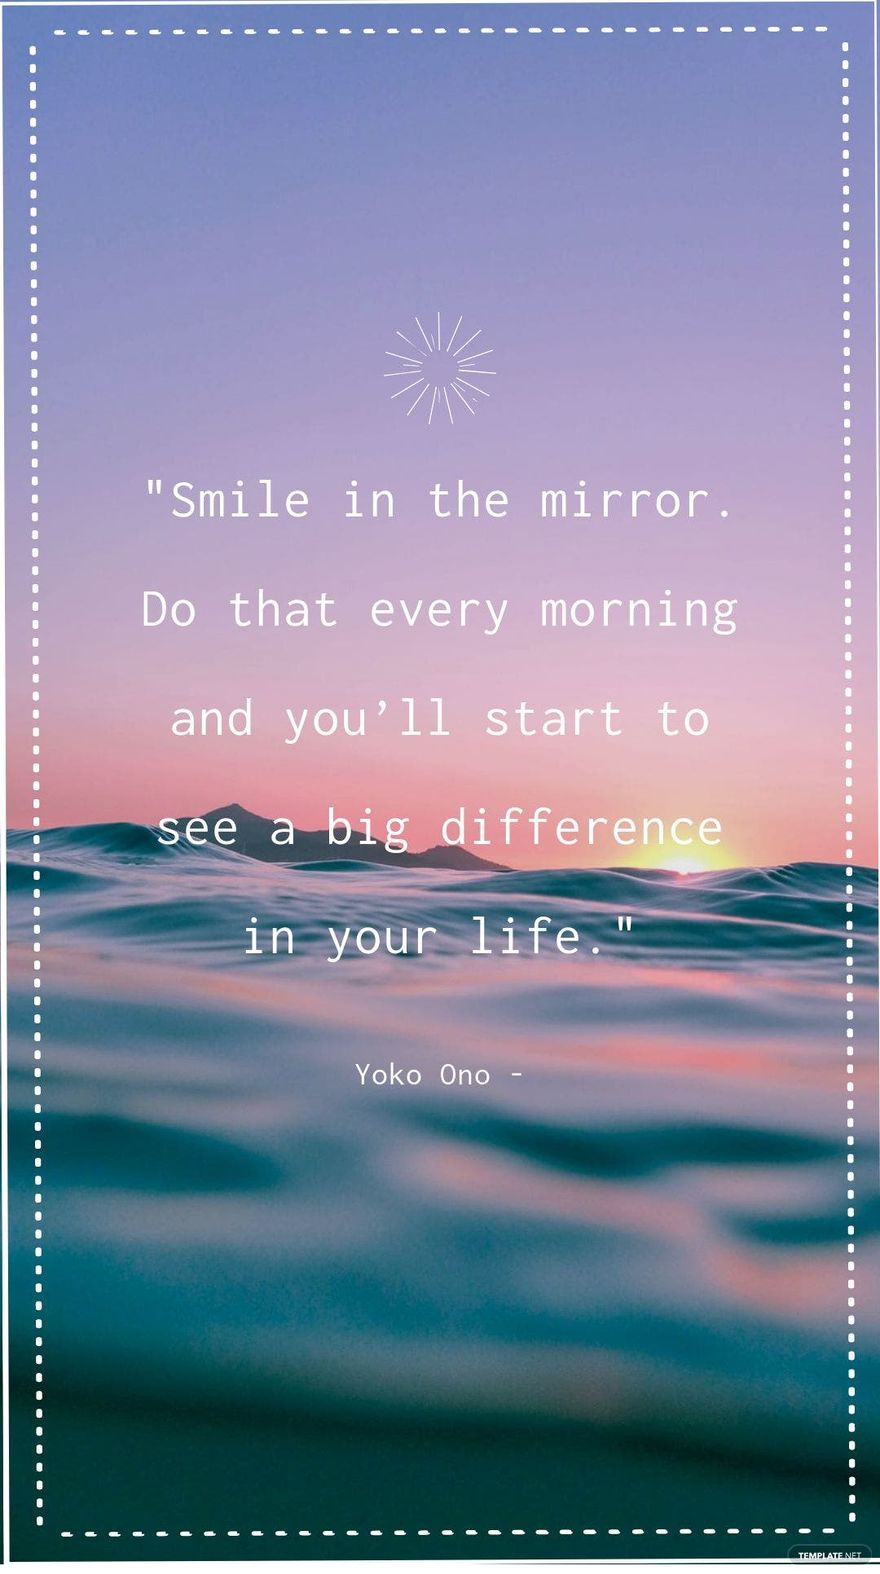 Yoko Ono - Smile in the mirror. Do that every morning and you’ll start to see a big difference in your life.